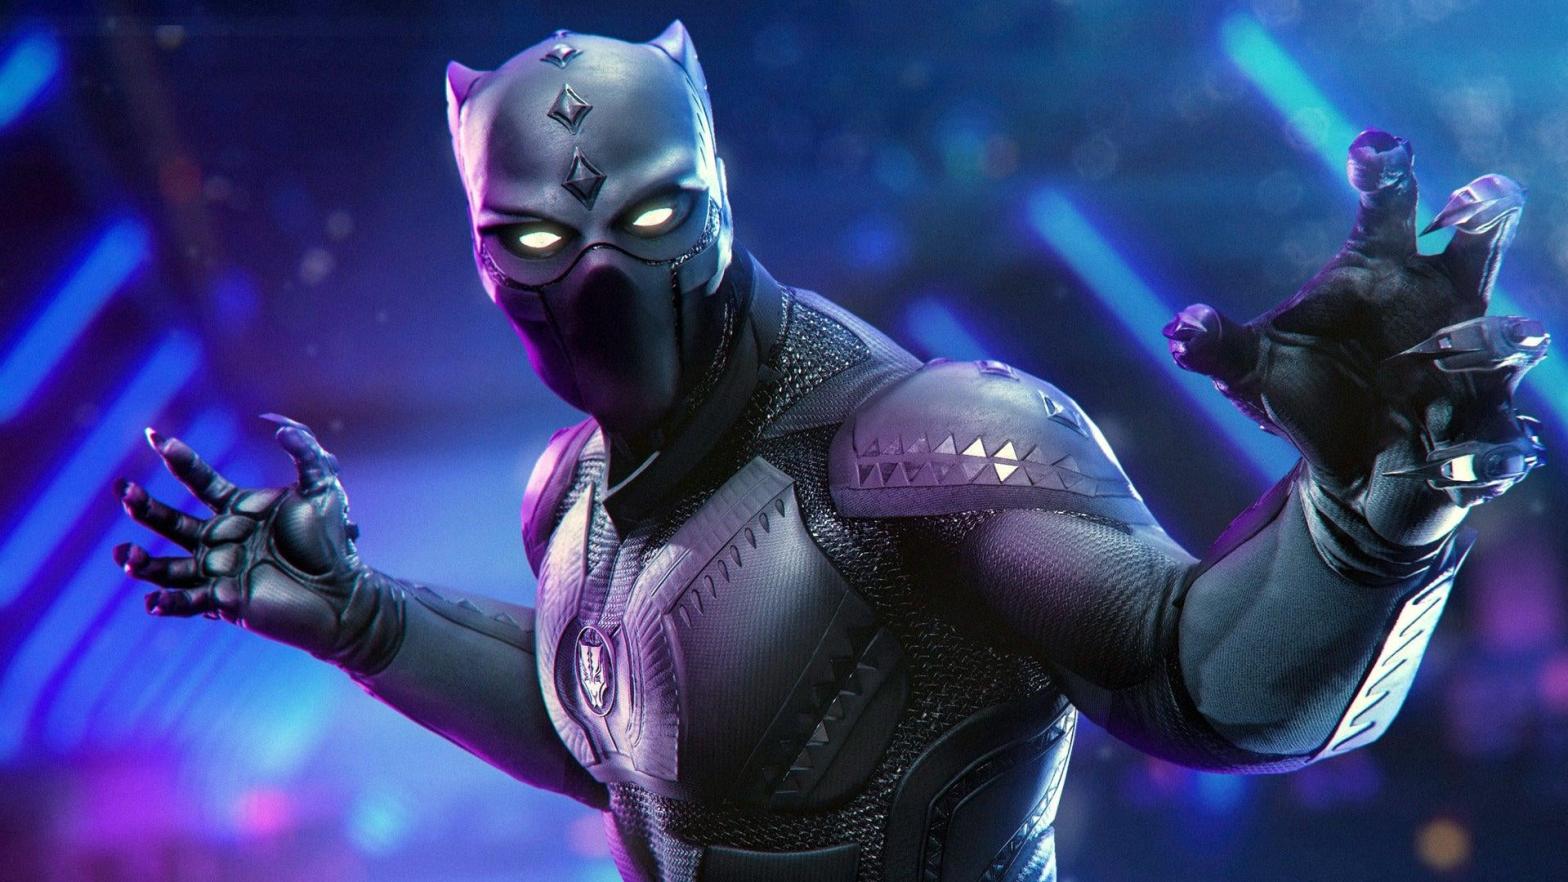 Black Panther in Marvel's Avengers (Image: Marvel Entertainment/Square Enix)